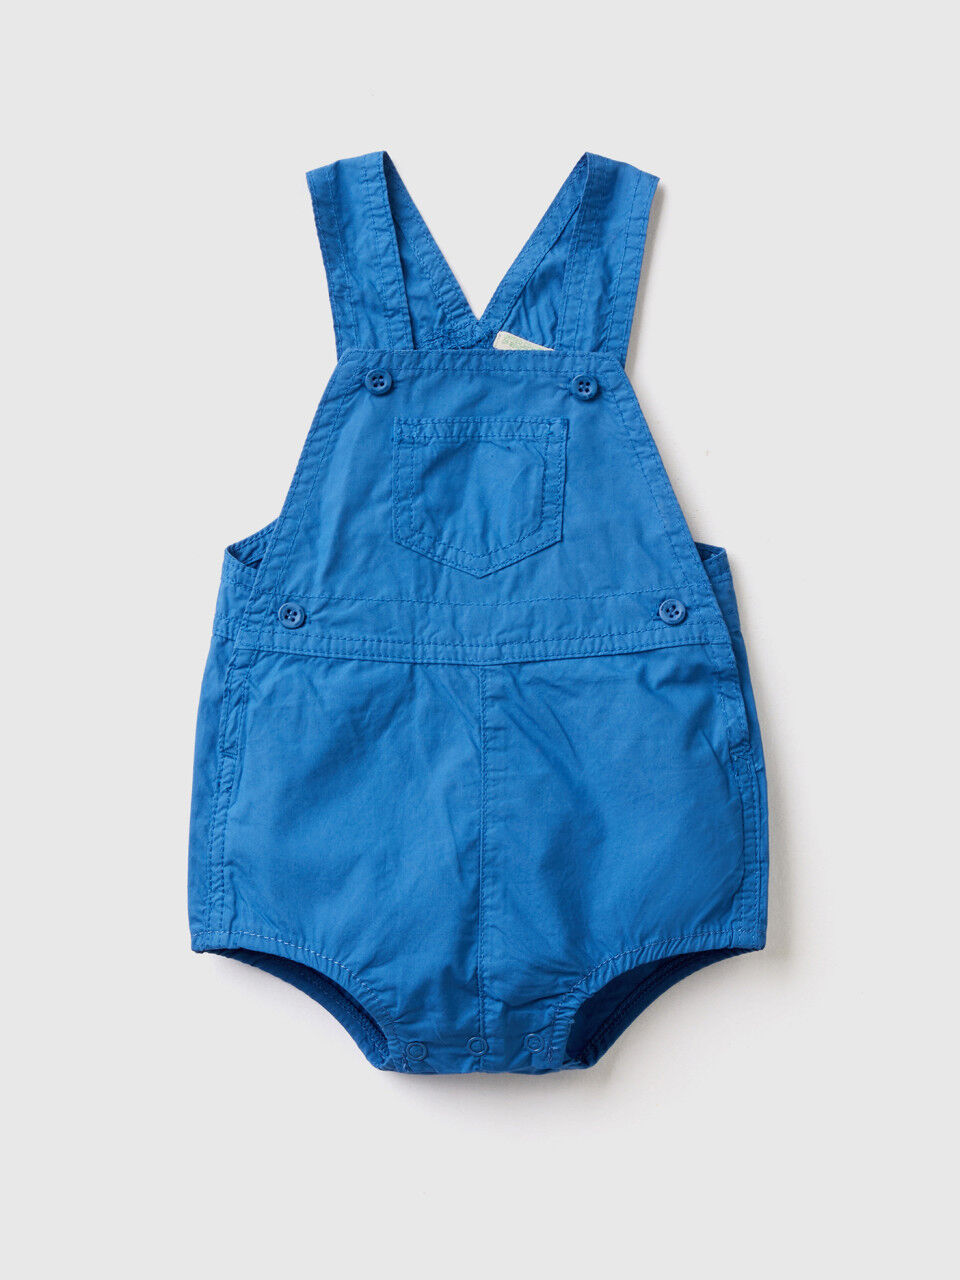 Overall onesie in 100% cotton